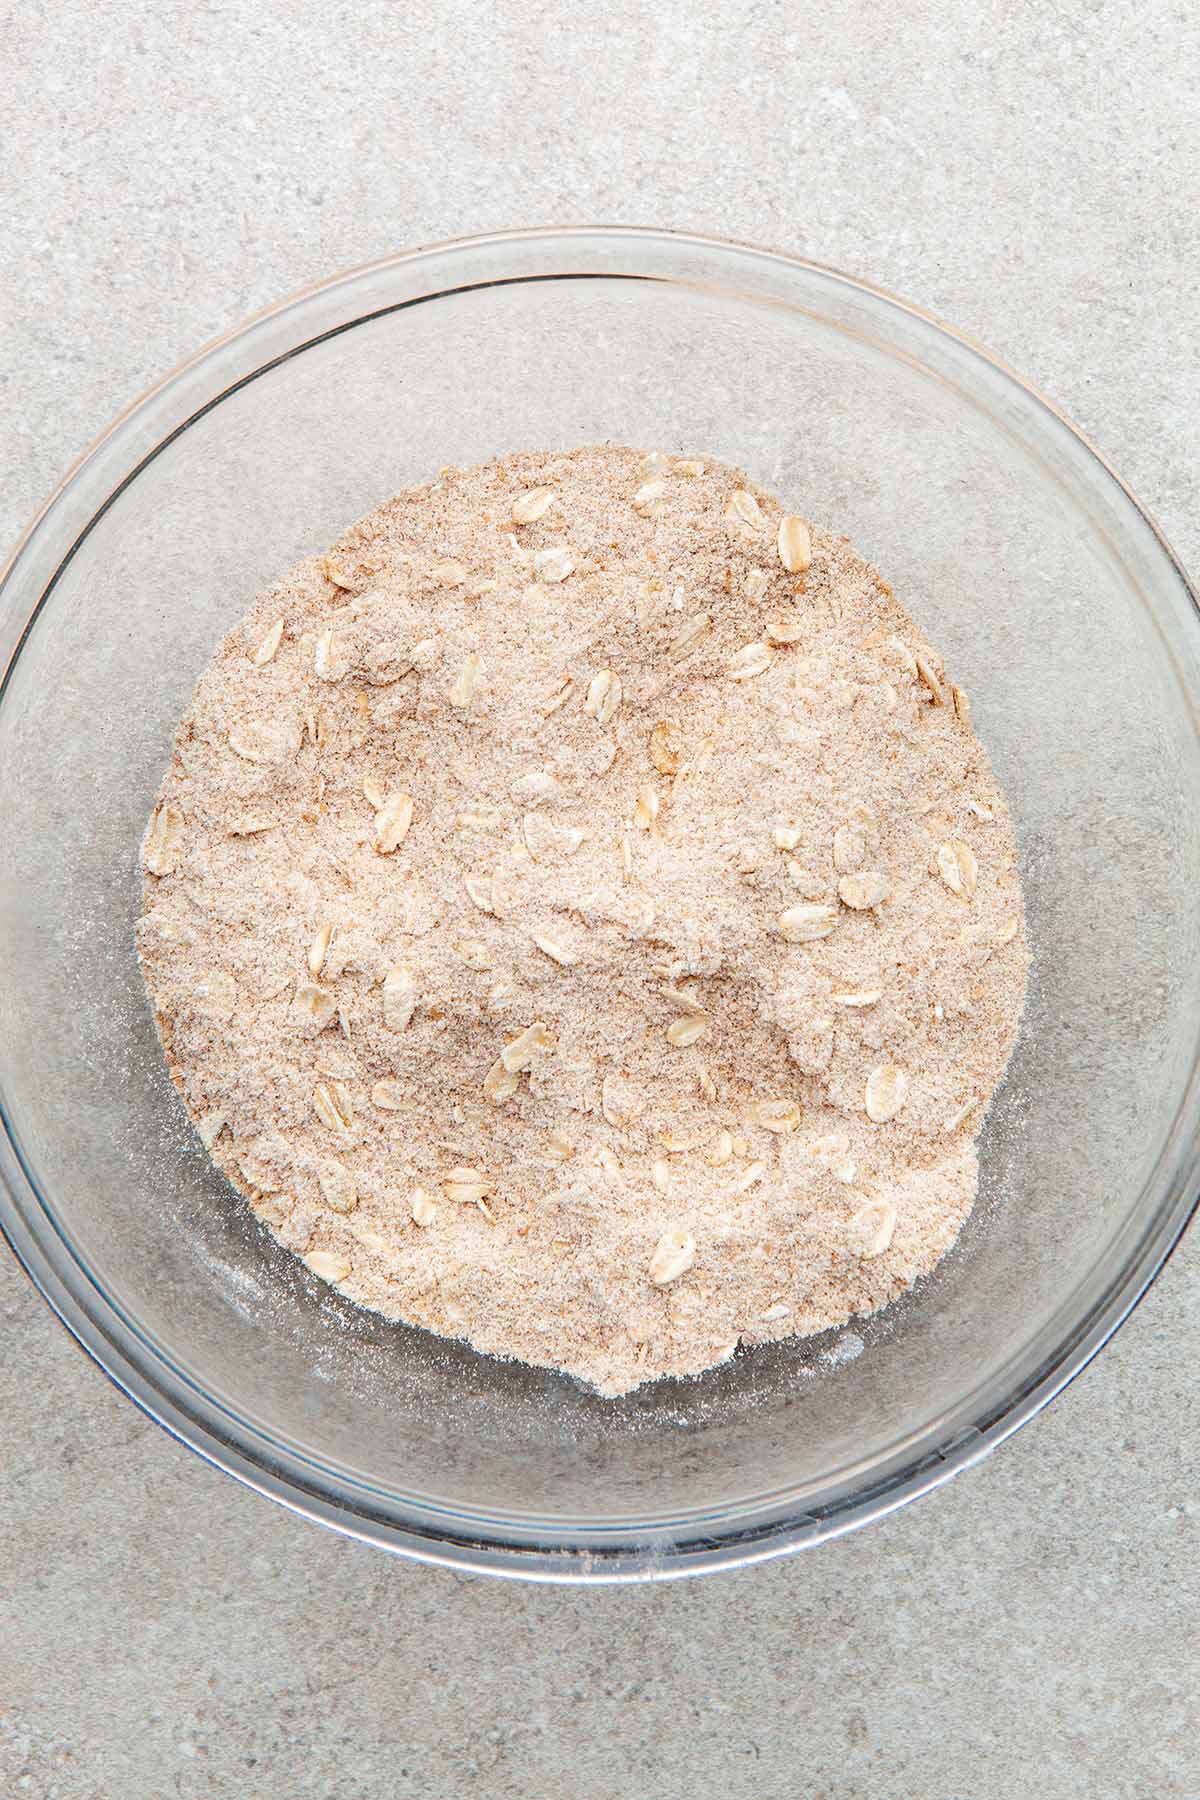 A glass bowl of oats, flour, cinnamon, and brown sugar mixed together.